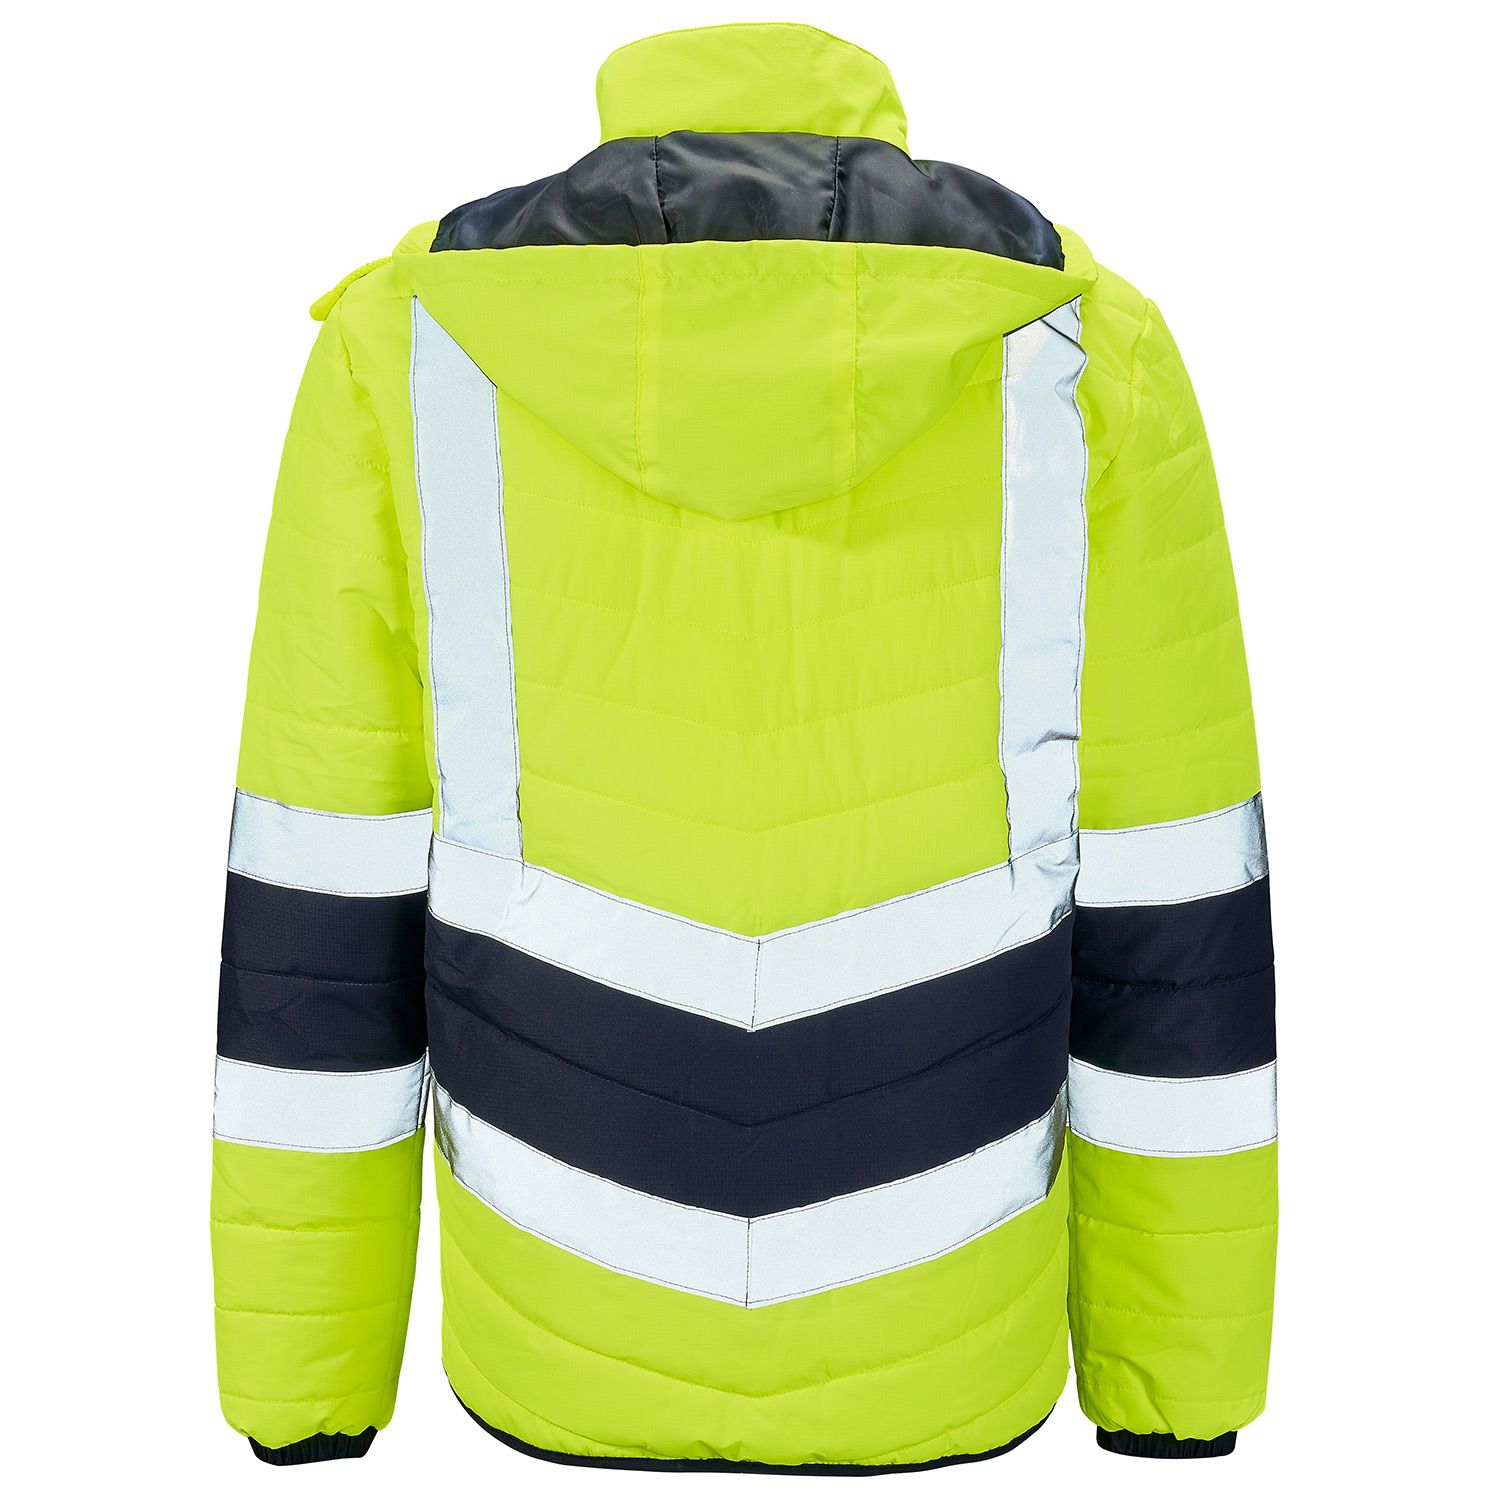 SUPERTOUCH Hi Vis Yellow 2 Tone Puffer Jacket | Welding and Safety ...